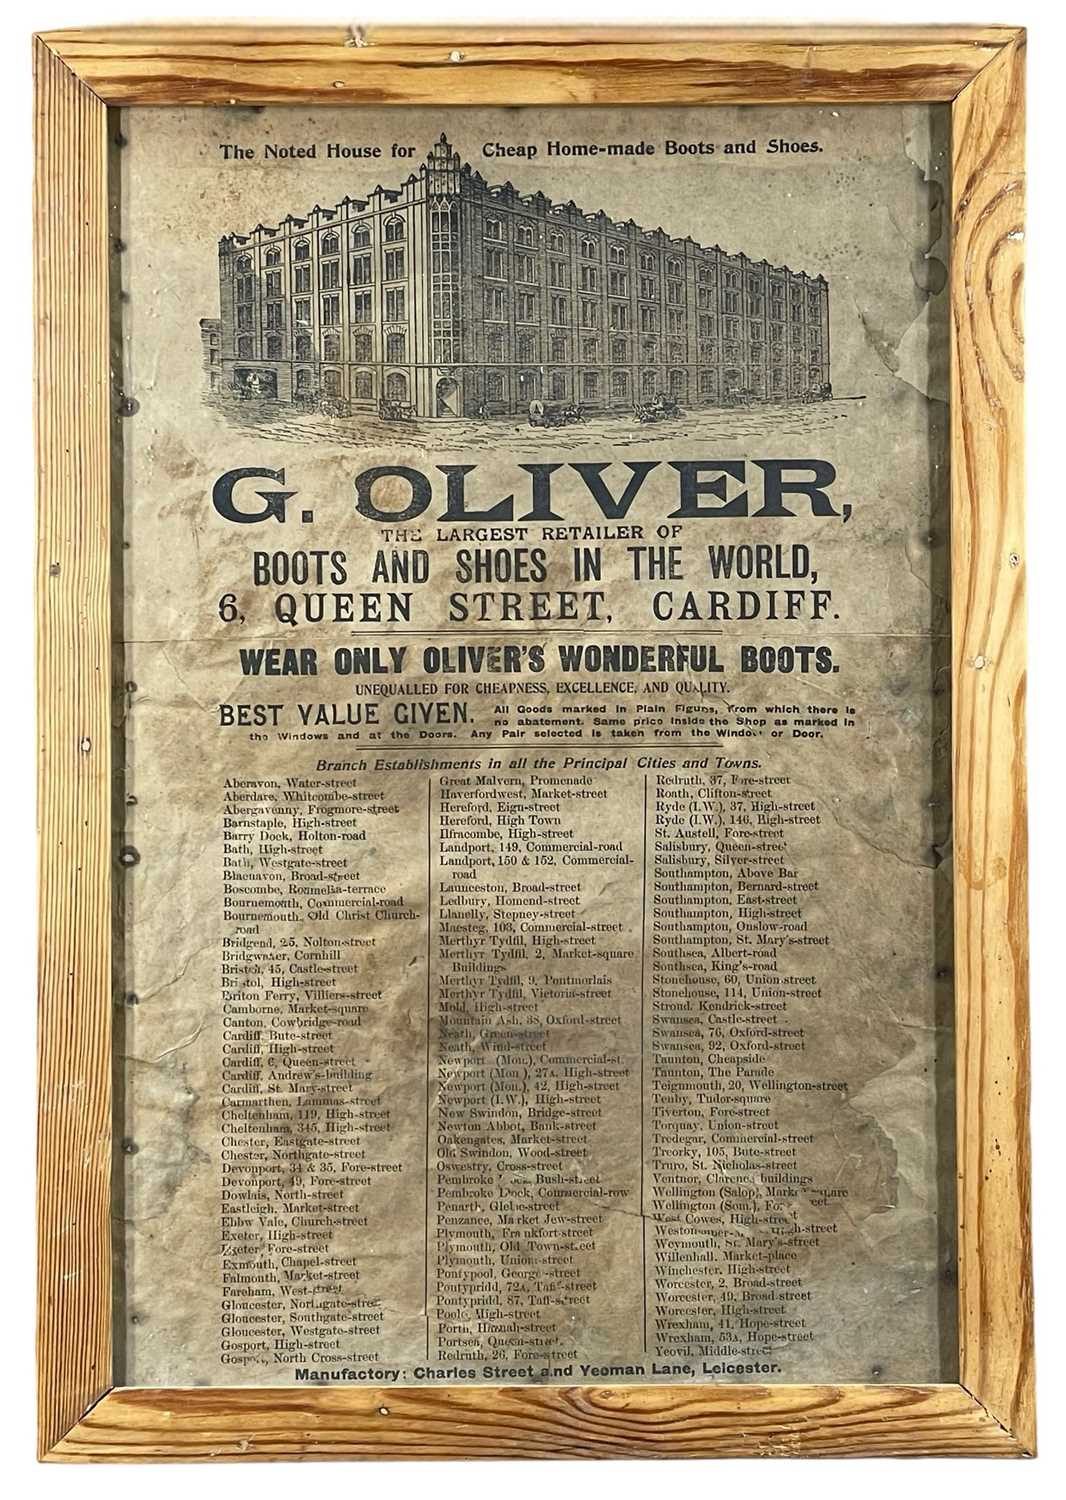 CARDIFF BILL POSTER FOR G OLIVER SHOE & BOOT RETAILER located at 6, Queen Street, Cardiff and